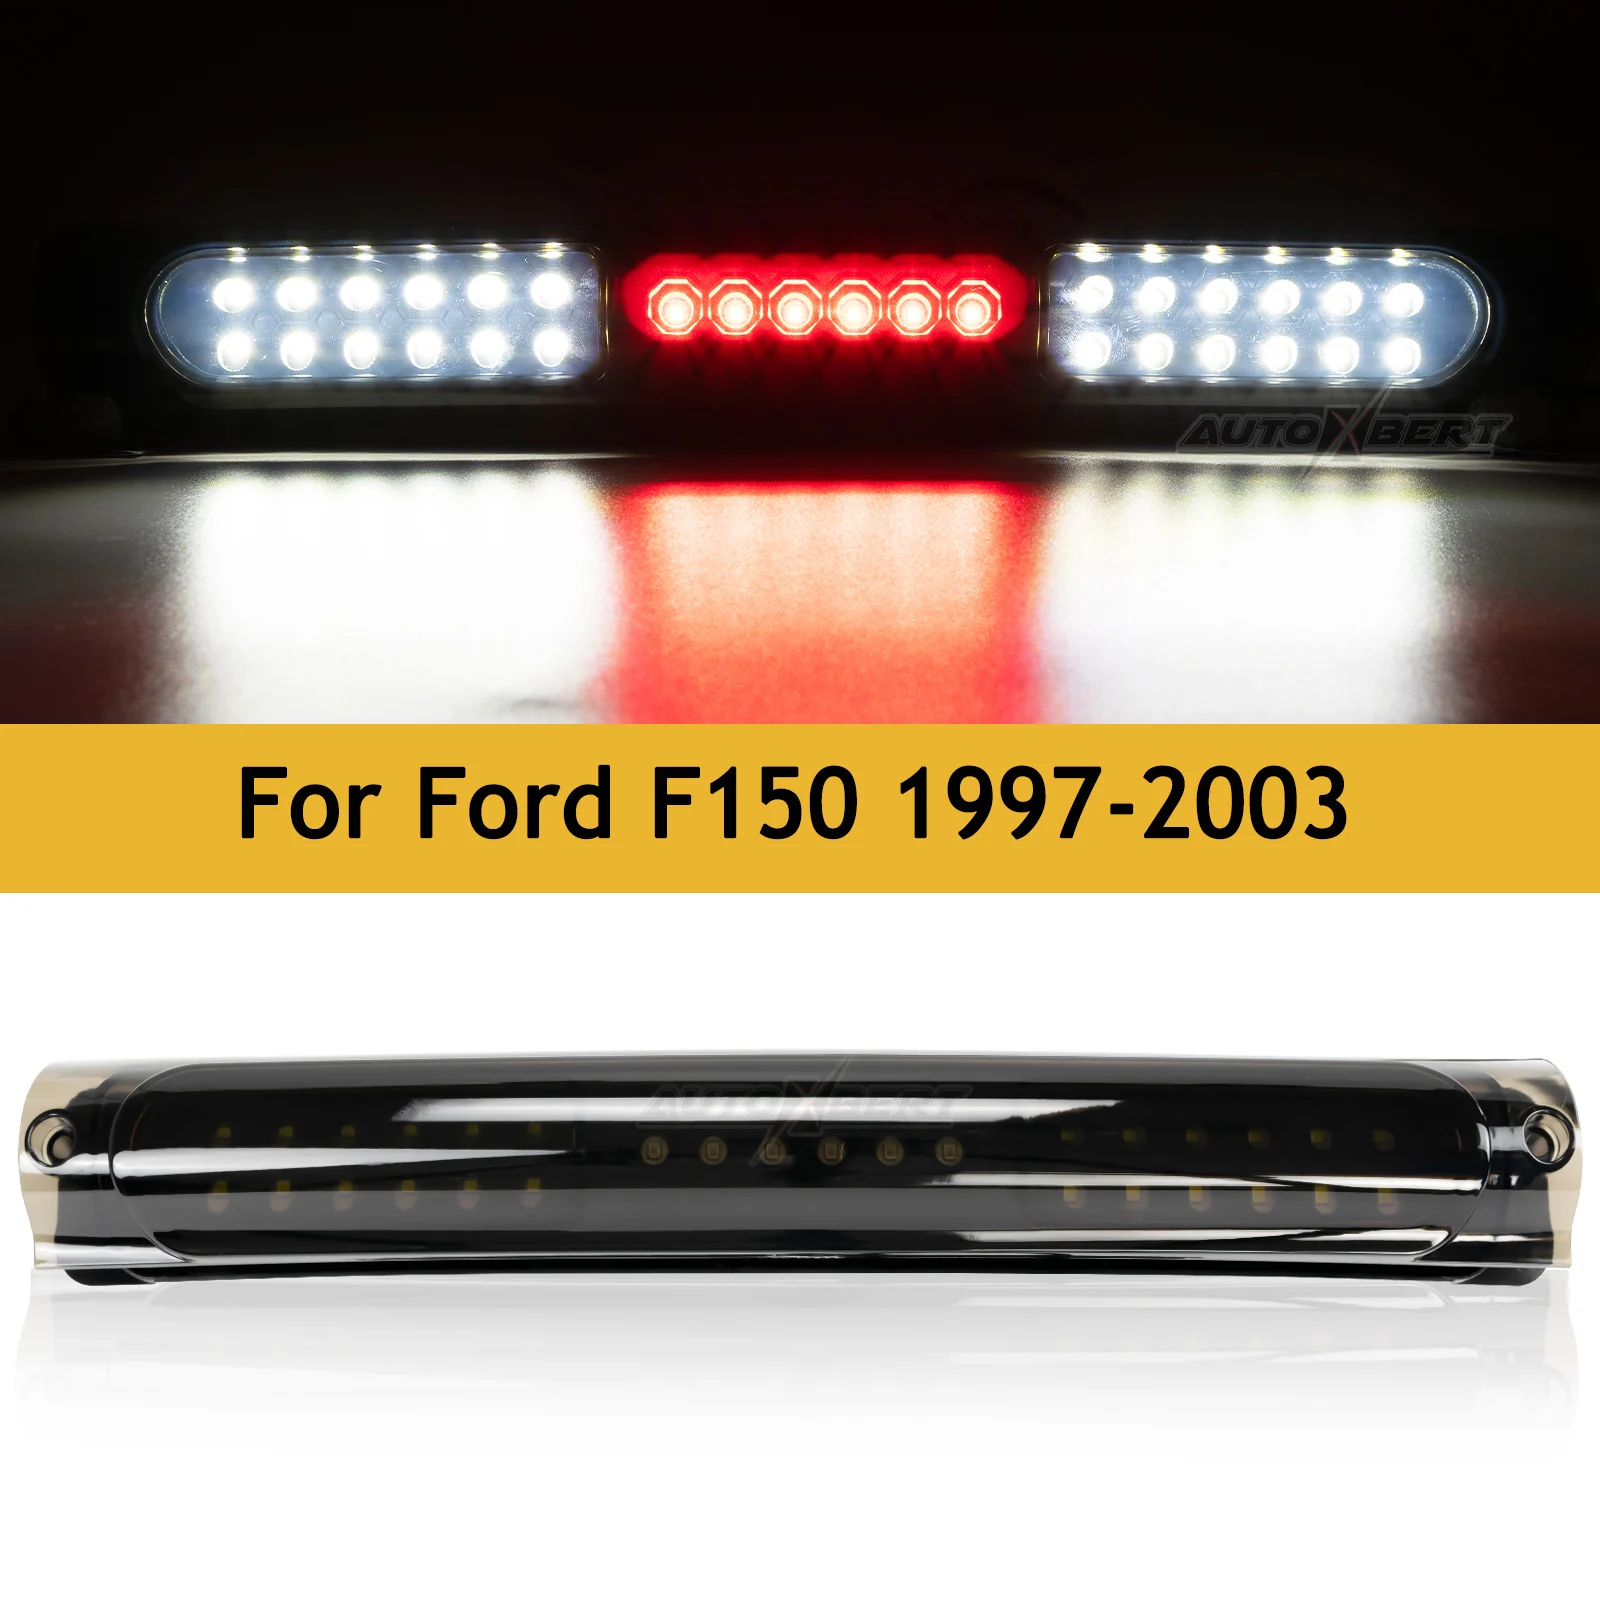 

For Ford F150 1997-2003 F250 Heritage Excursion 3rd Third Tail Brake Light High Mount Stop Rear Cargo Top Roof Lamp Cab Center